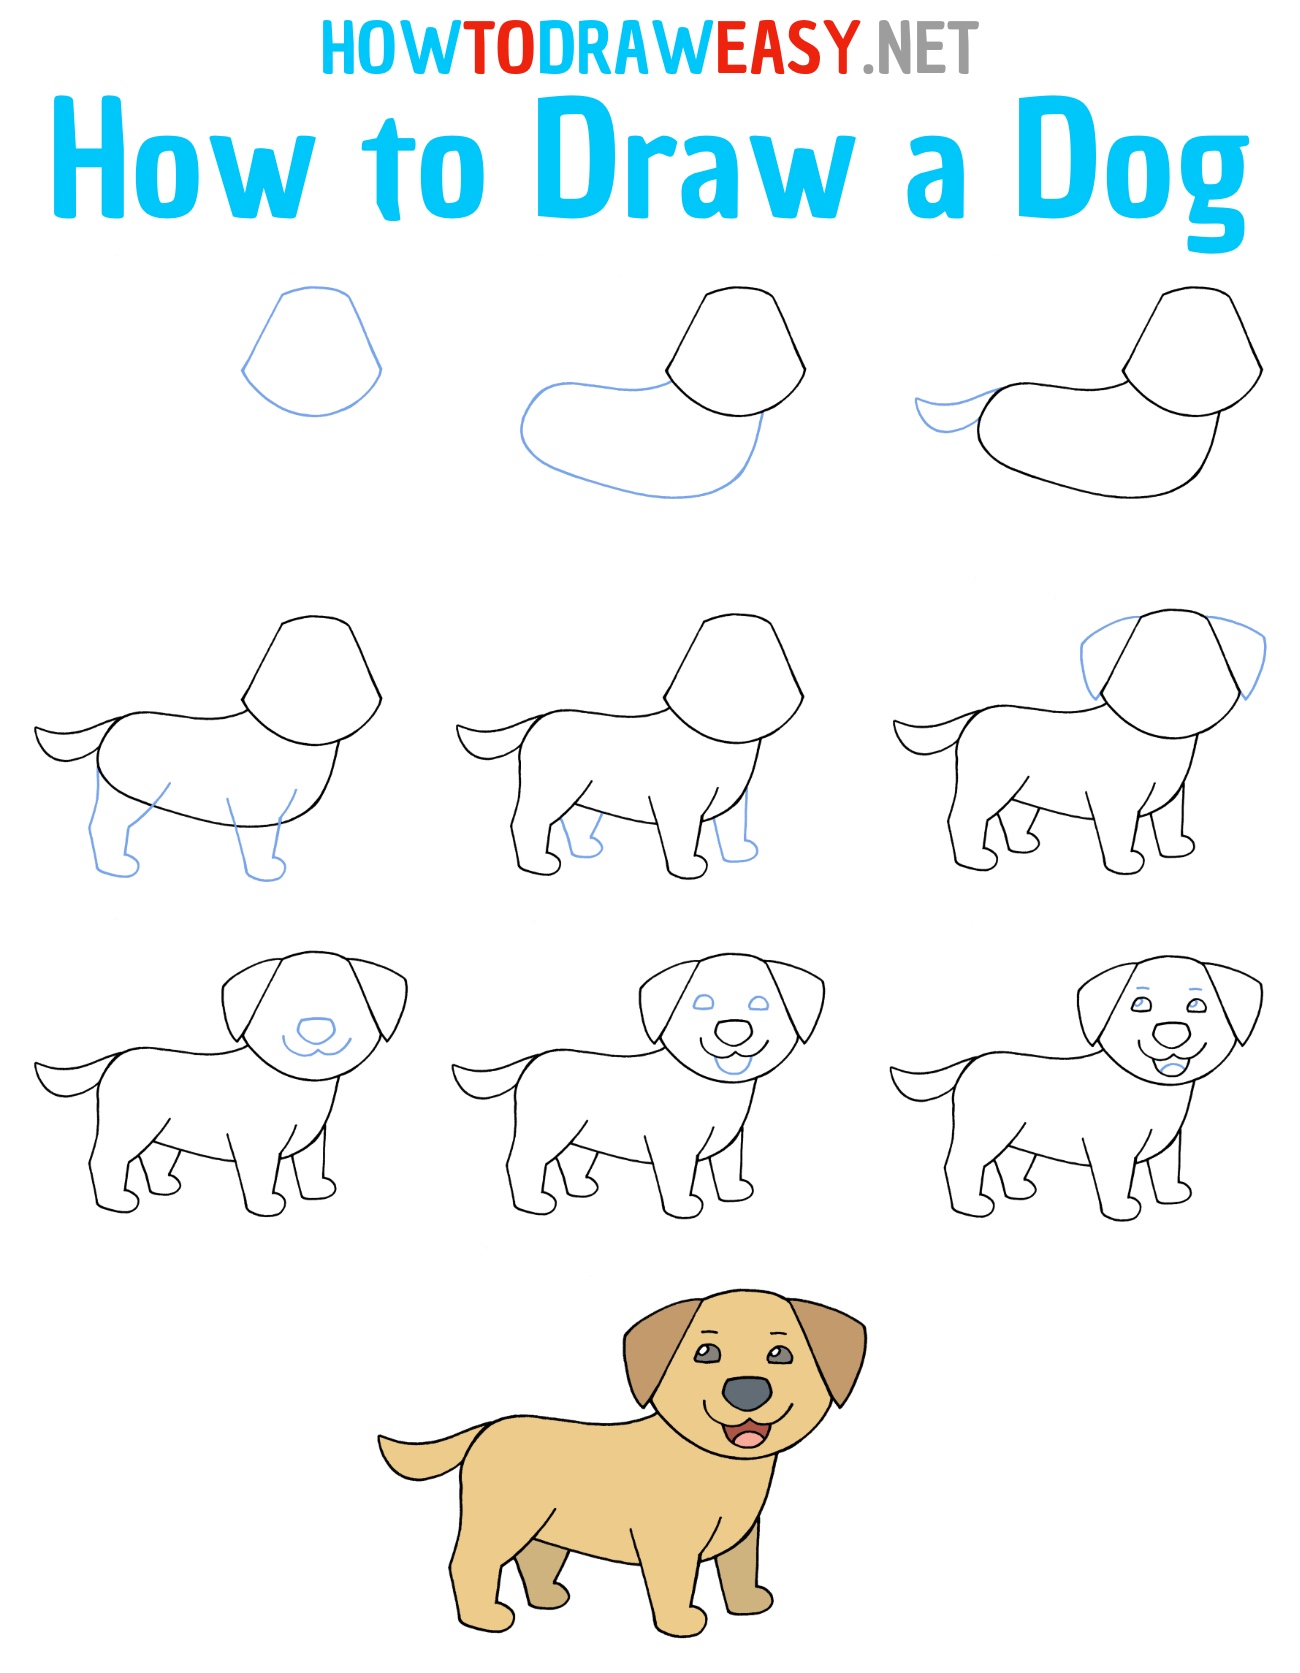 How to Draw an Easy Dog Step by Step